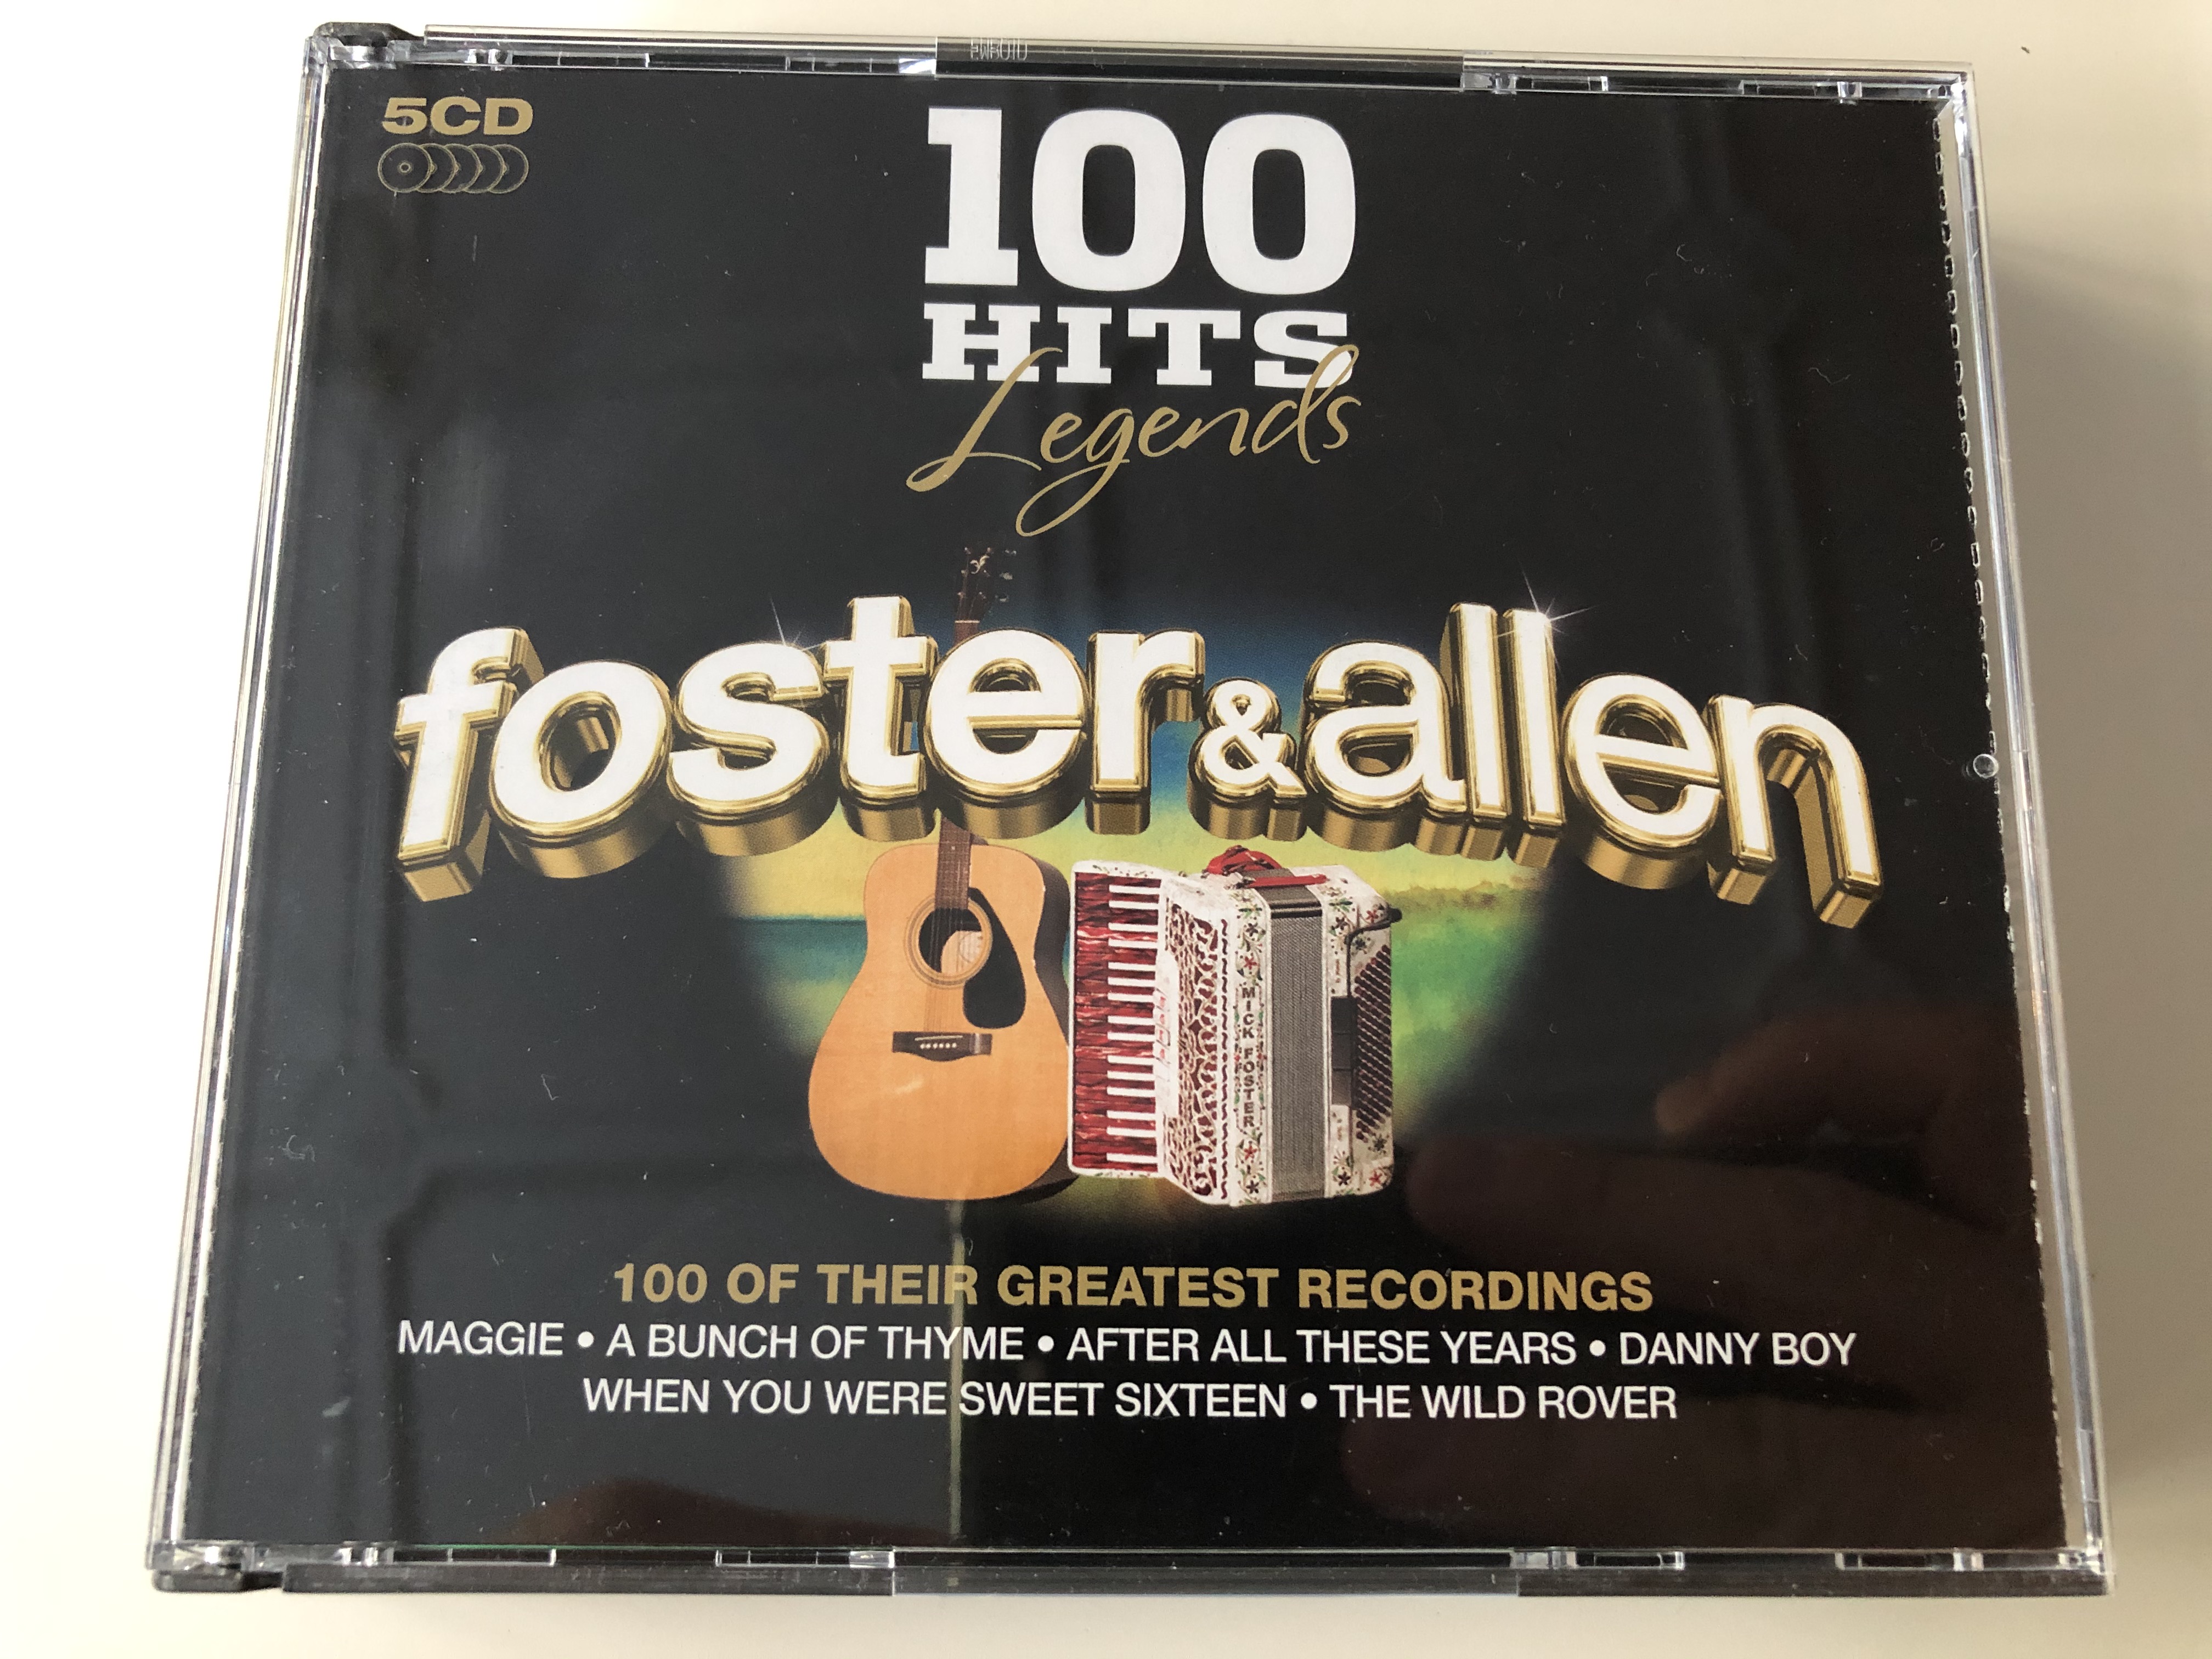 100-hits-legends-foster-allen-100-of-their-greatest-recordings-maggie-a-bunch-of-thyme-after-all-these-years-danny-boy-when-you-were-sweet-sixteen-the-wild-rover-demon-music-group-lt-1-.jpg